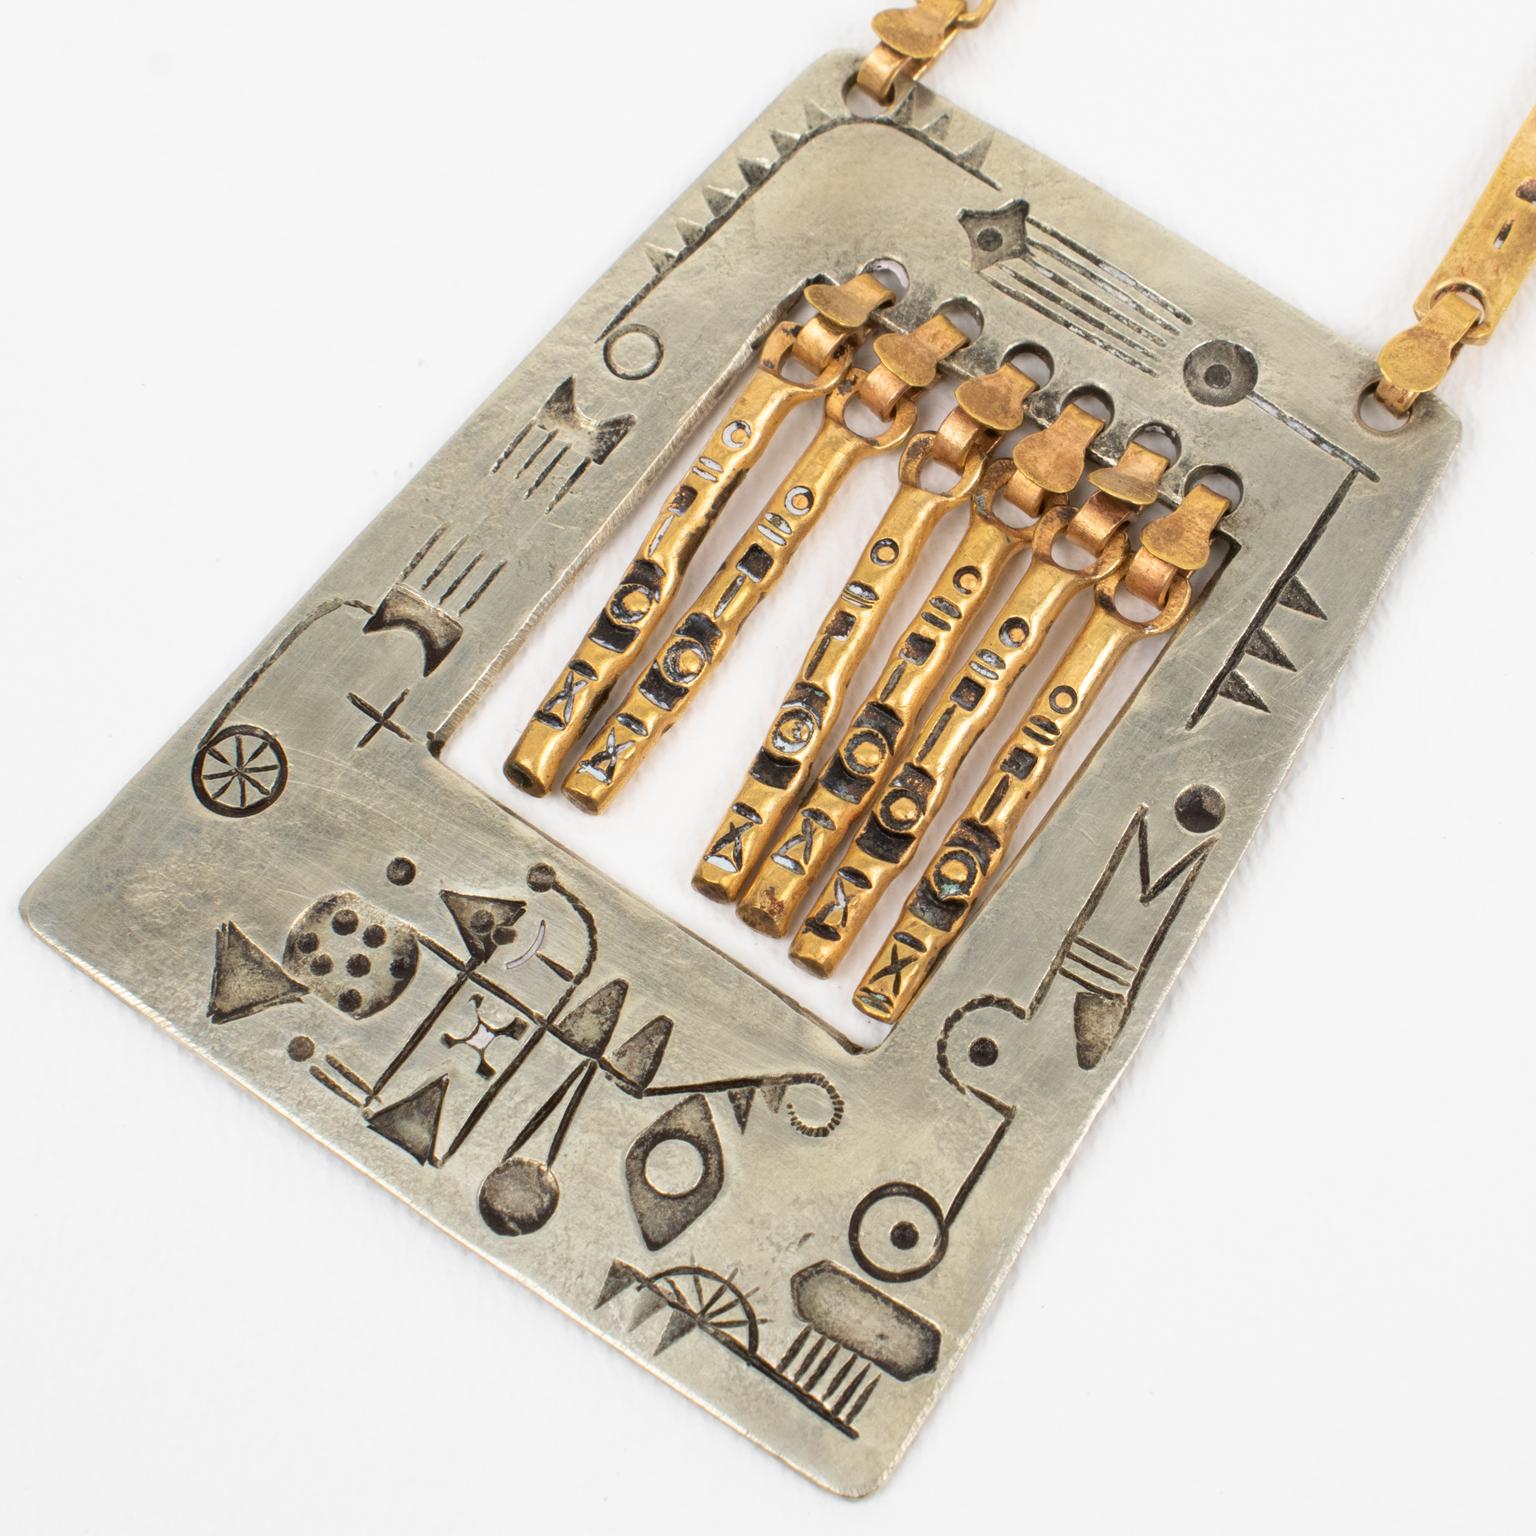 Modernist Brass and Silvered Metal Hieroglyph or Ethnic Graffiti Necklace, 1960s For Sale 3